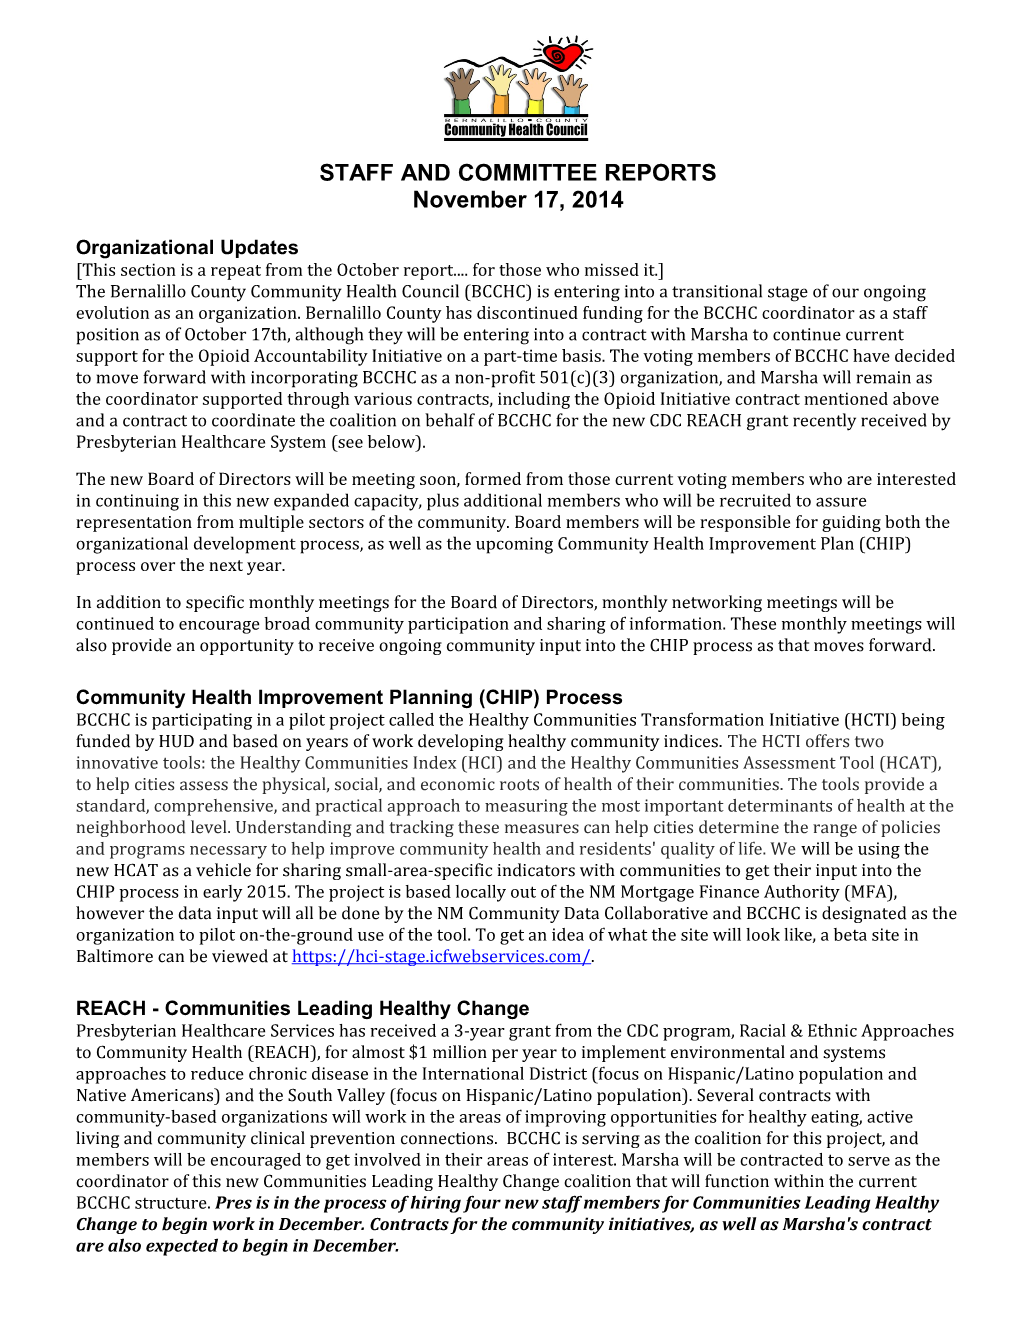 STAFF and COMMITTEE REPORTS November 17, 2014